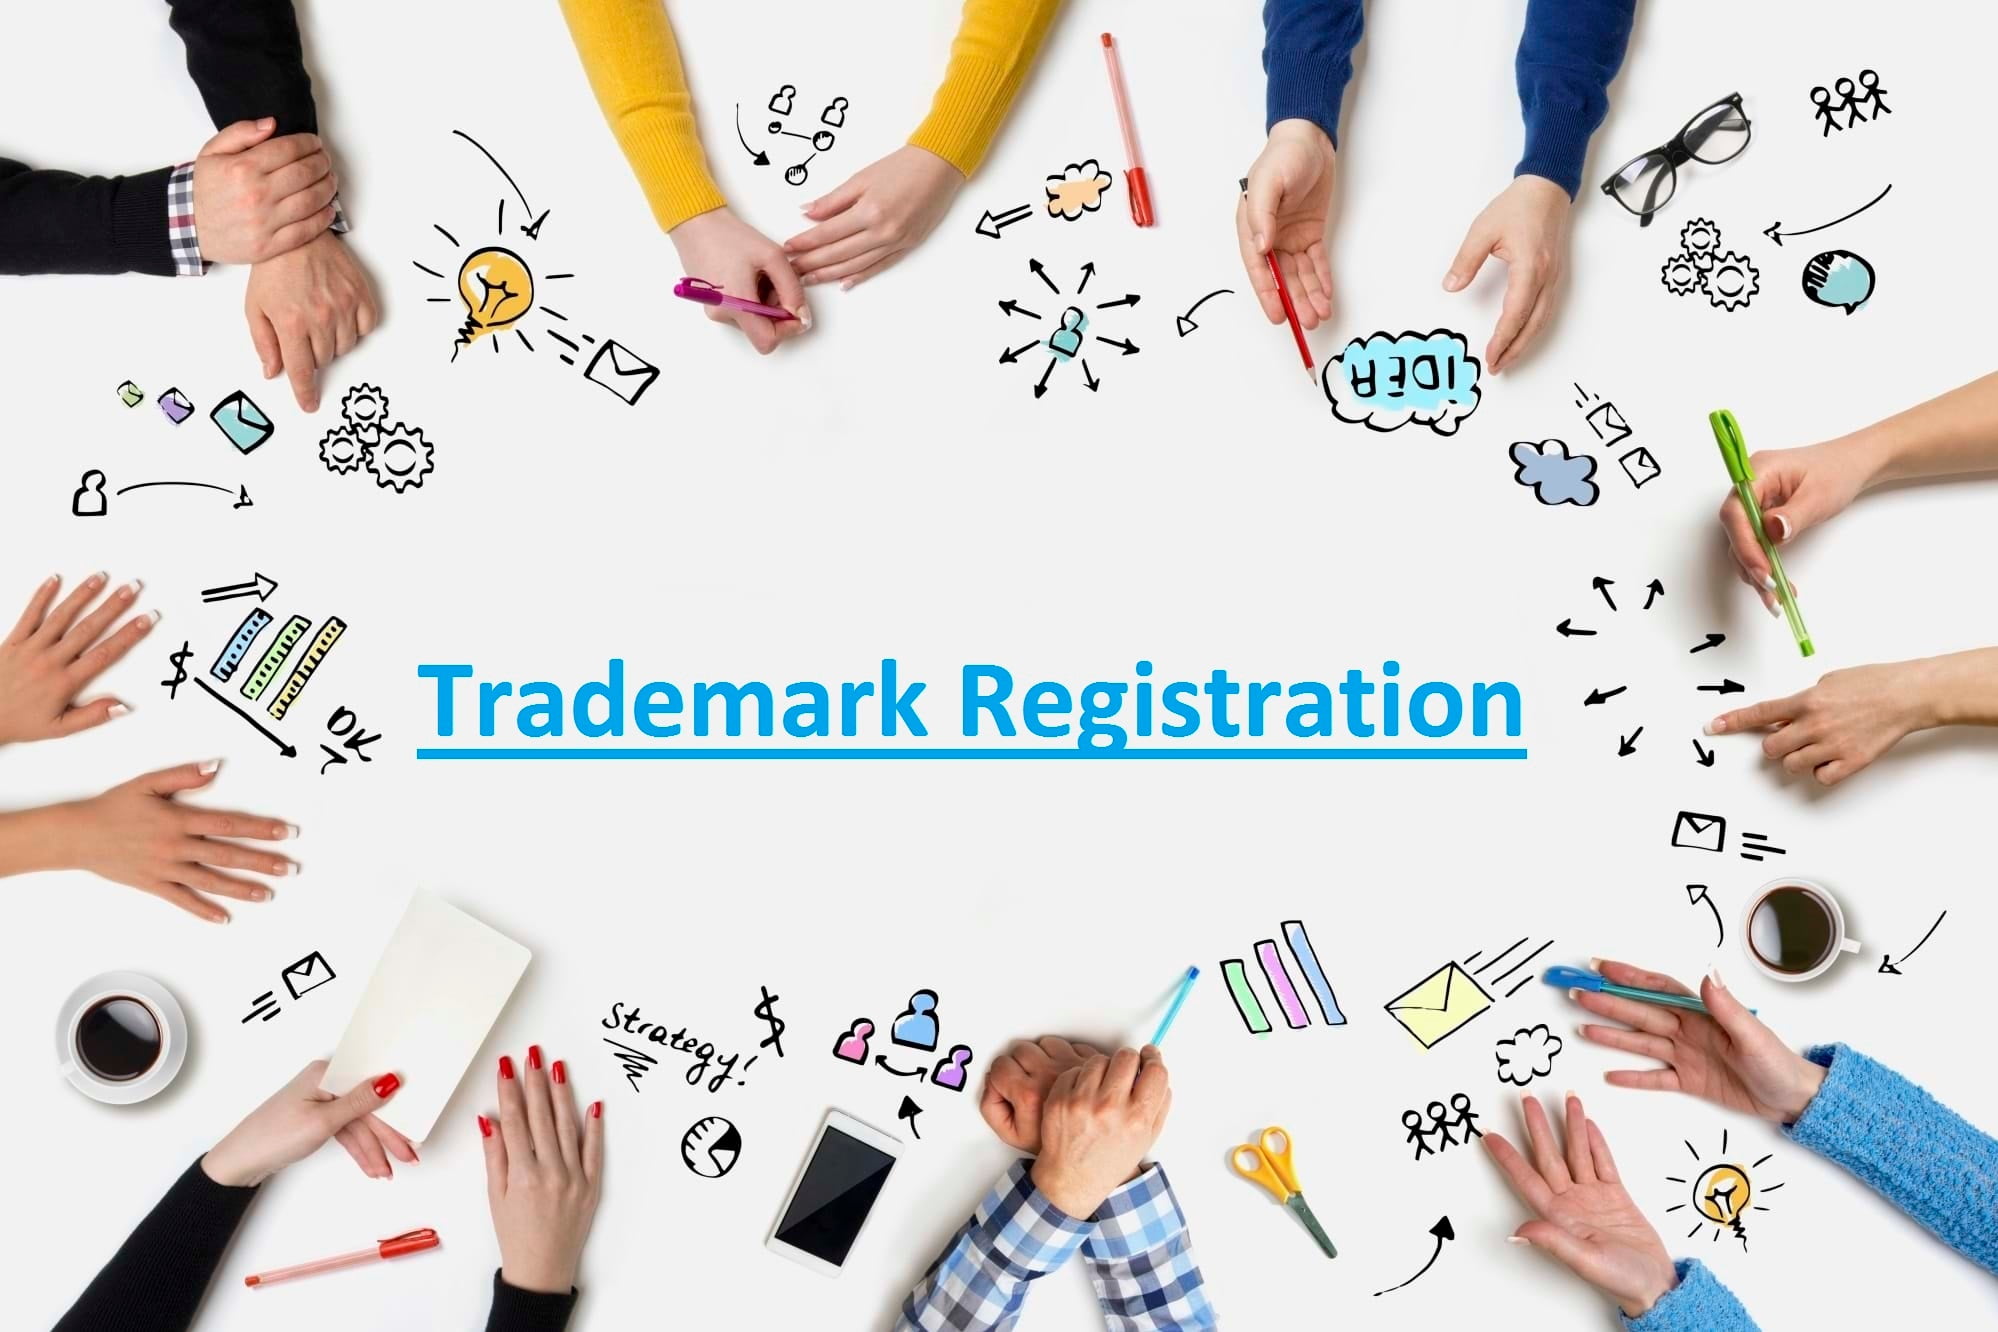 What Is Trademark